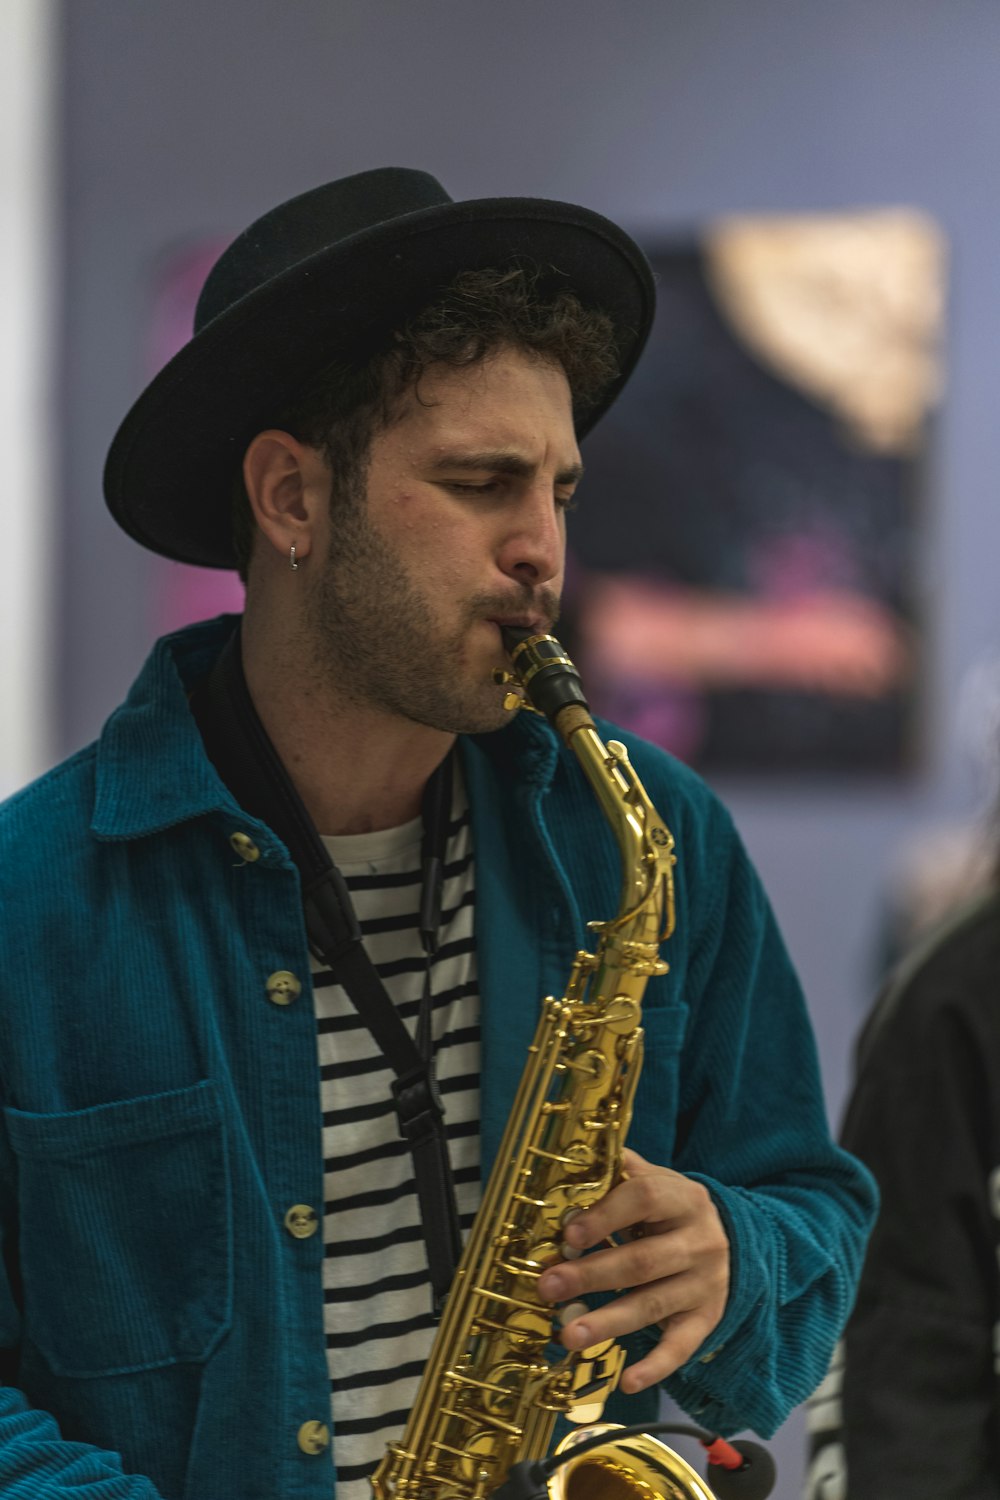 a man with a hat playing a saxophone